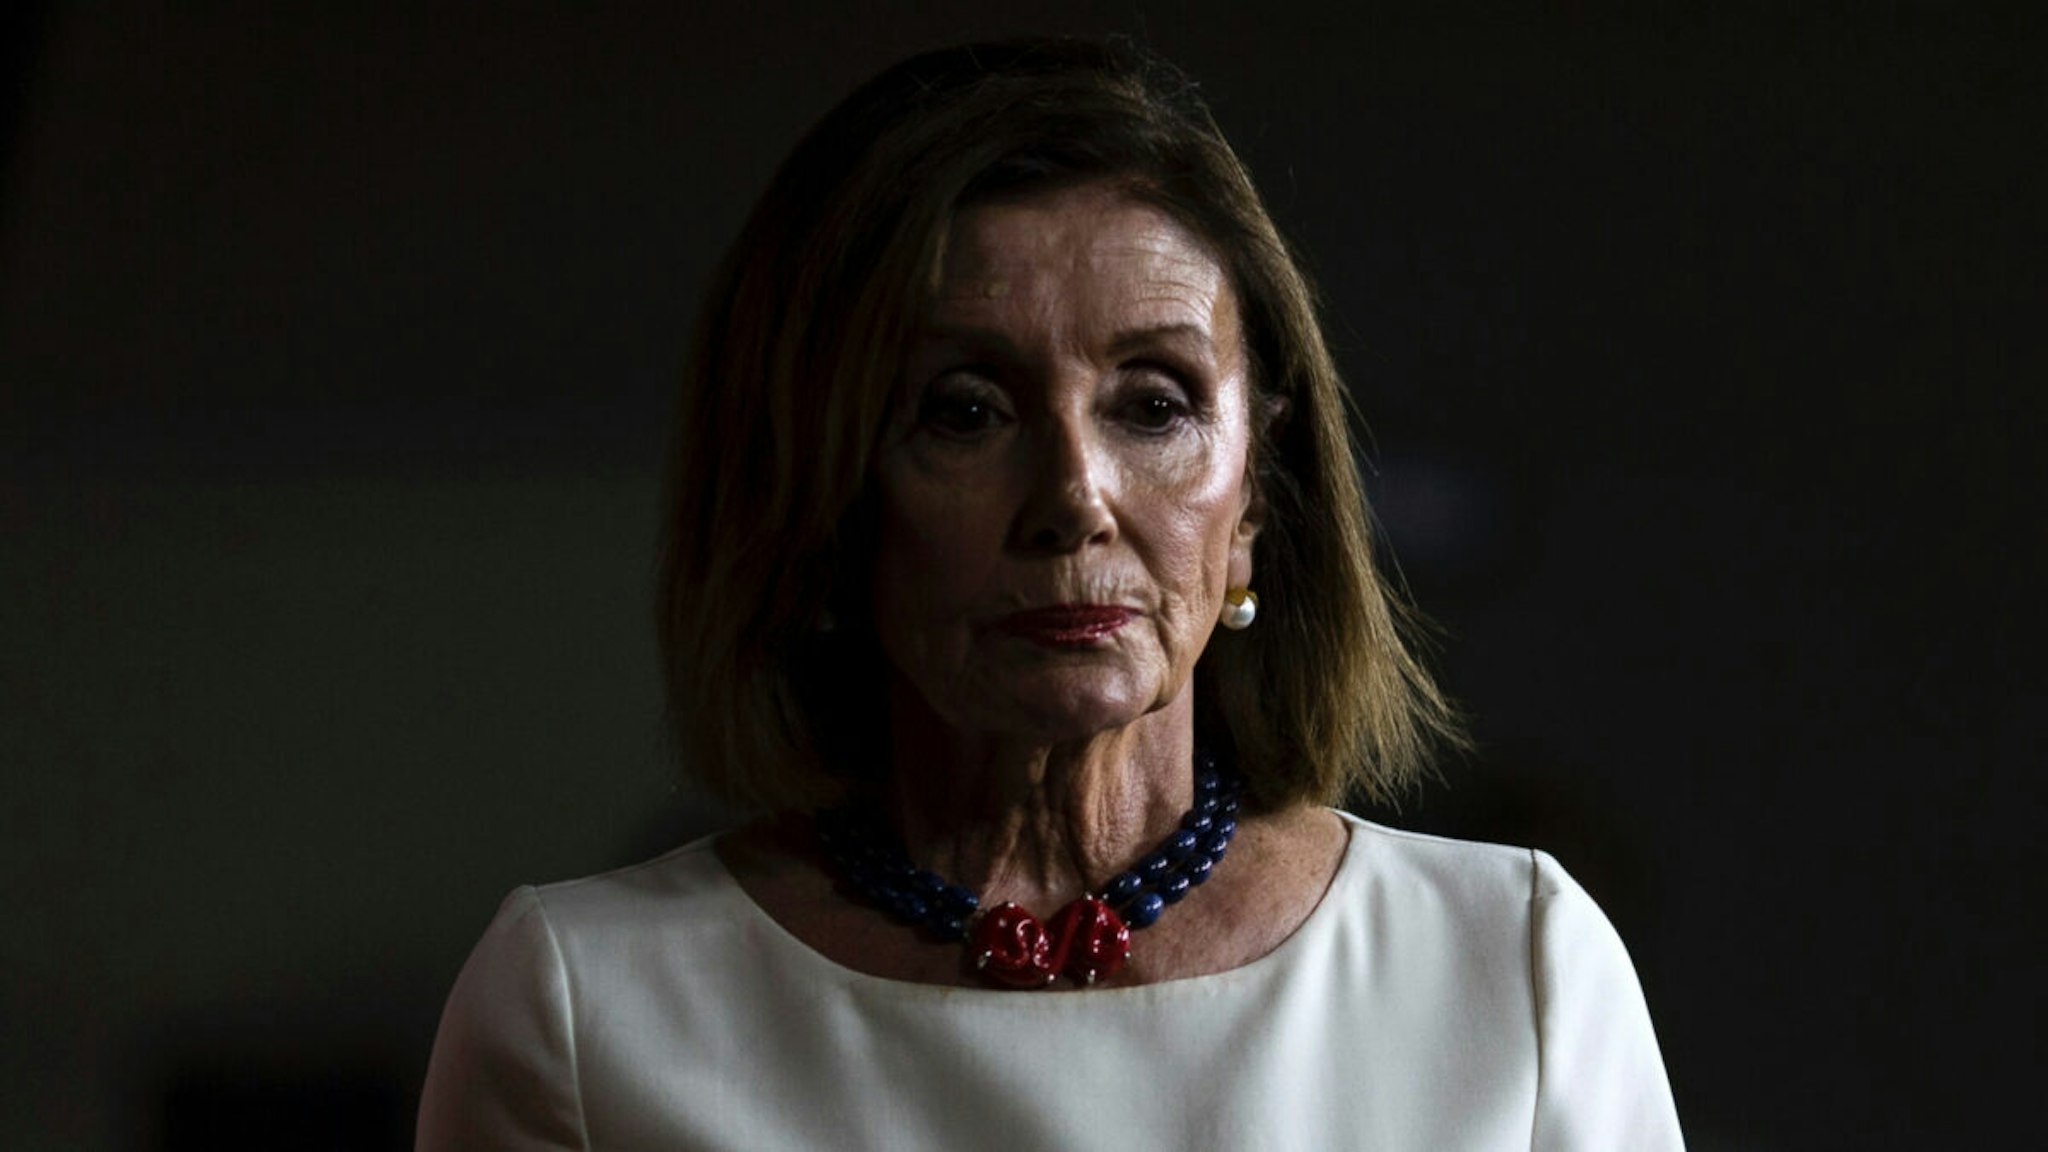 House Speaker Nancy Pelosi (D-CA) speaks during a weekly news conference on Capitol Hill on September 26, 2019 in Washington, DC.